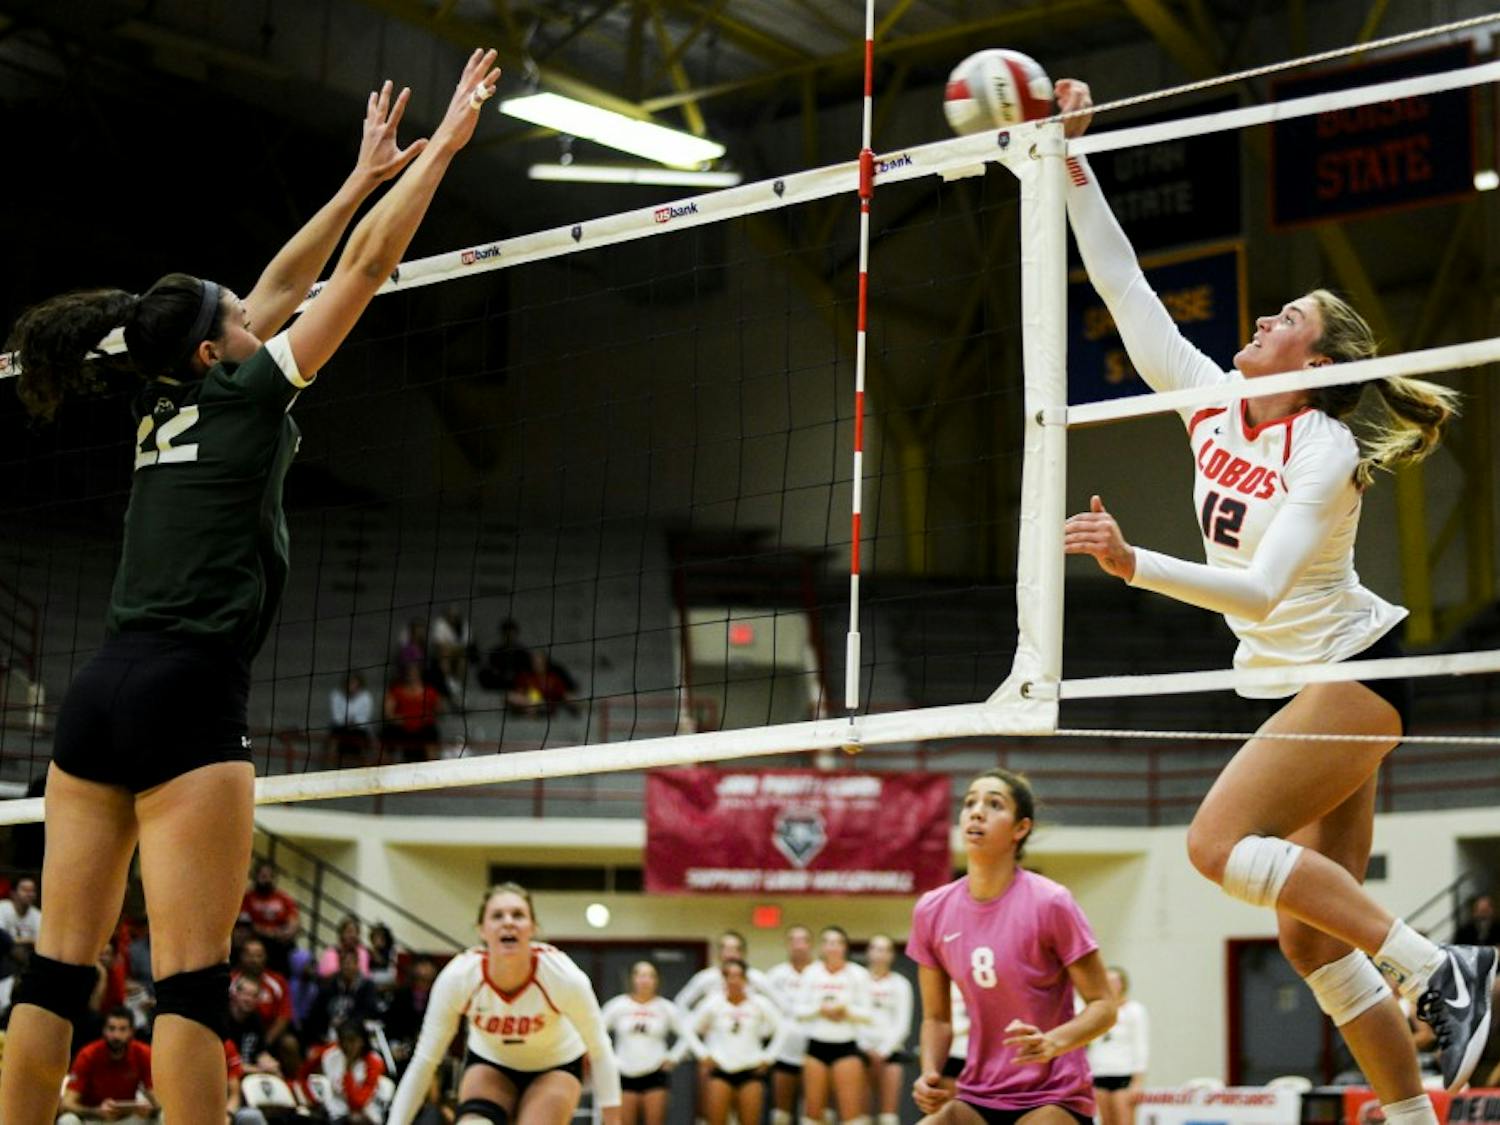 Senior outside hitter Cassie House attempts to score against Colorado State during their match Saturday, Oct. 6, 2016 at Johnson Center Gym. The Lobos will face off with Nevada this Wednesday at 7:30 in Reno, Nevada.&nbsp;